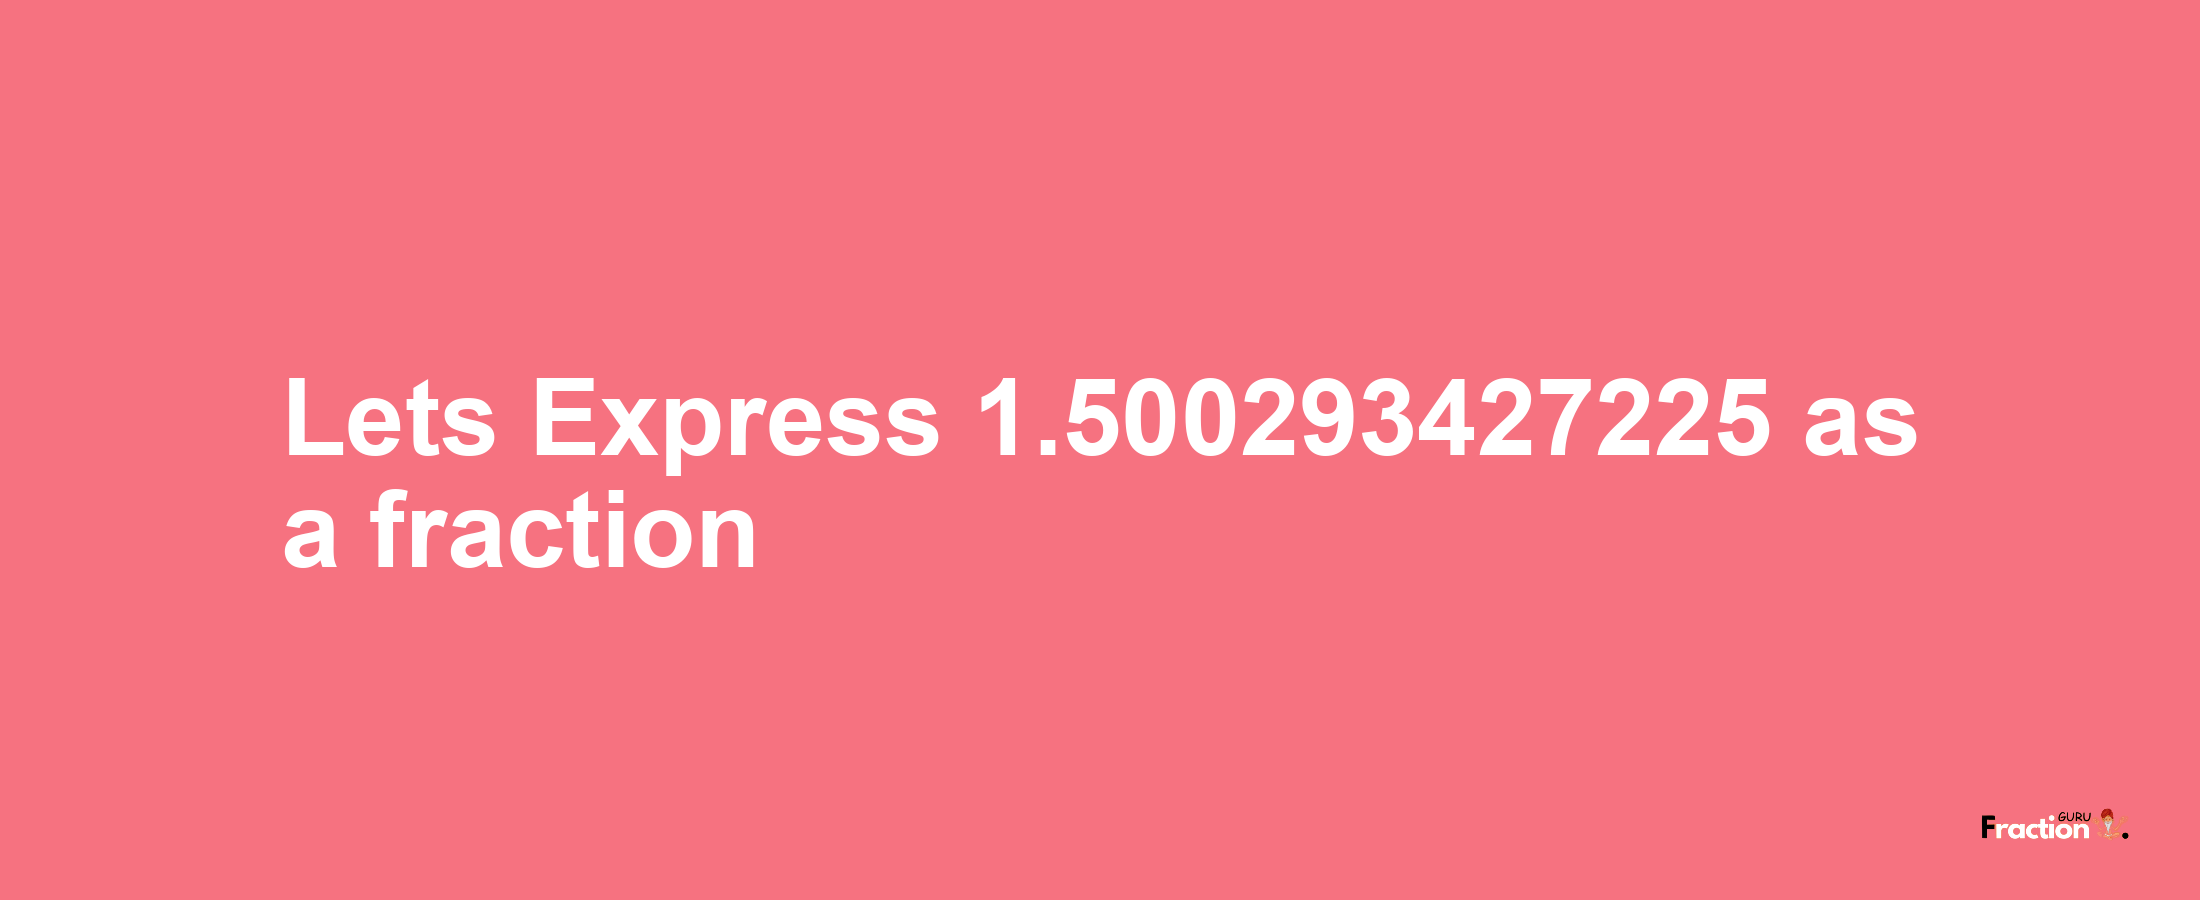 Lets Express 1.500293427225 as afraction